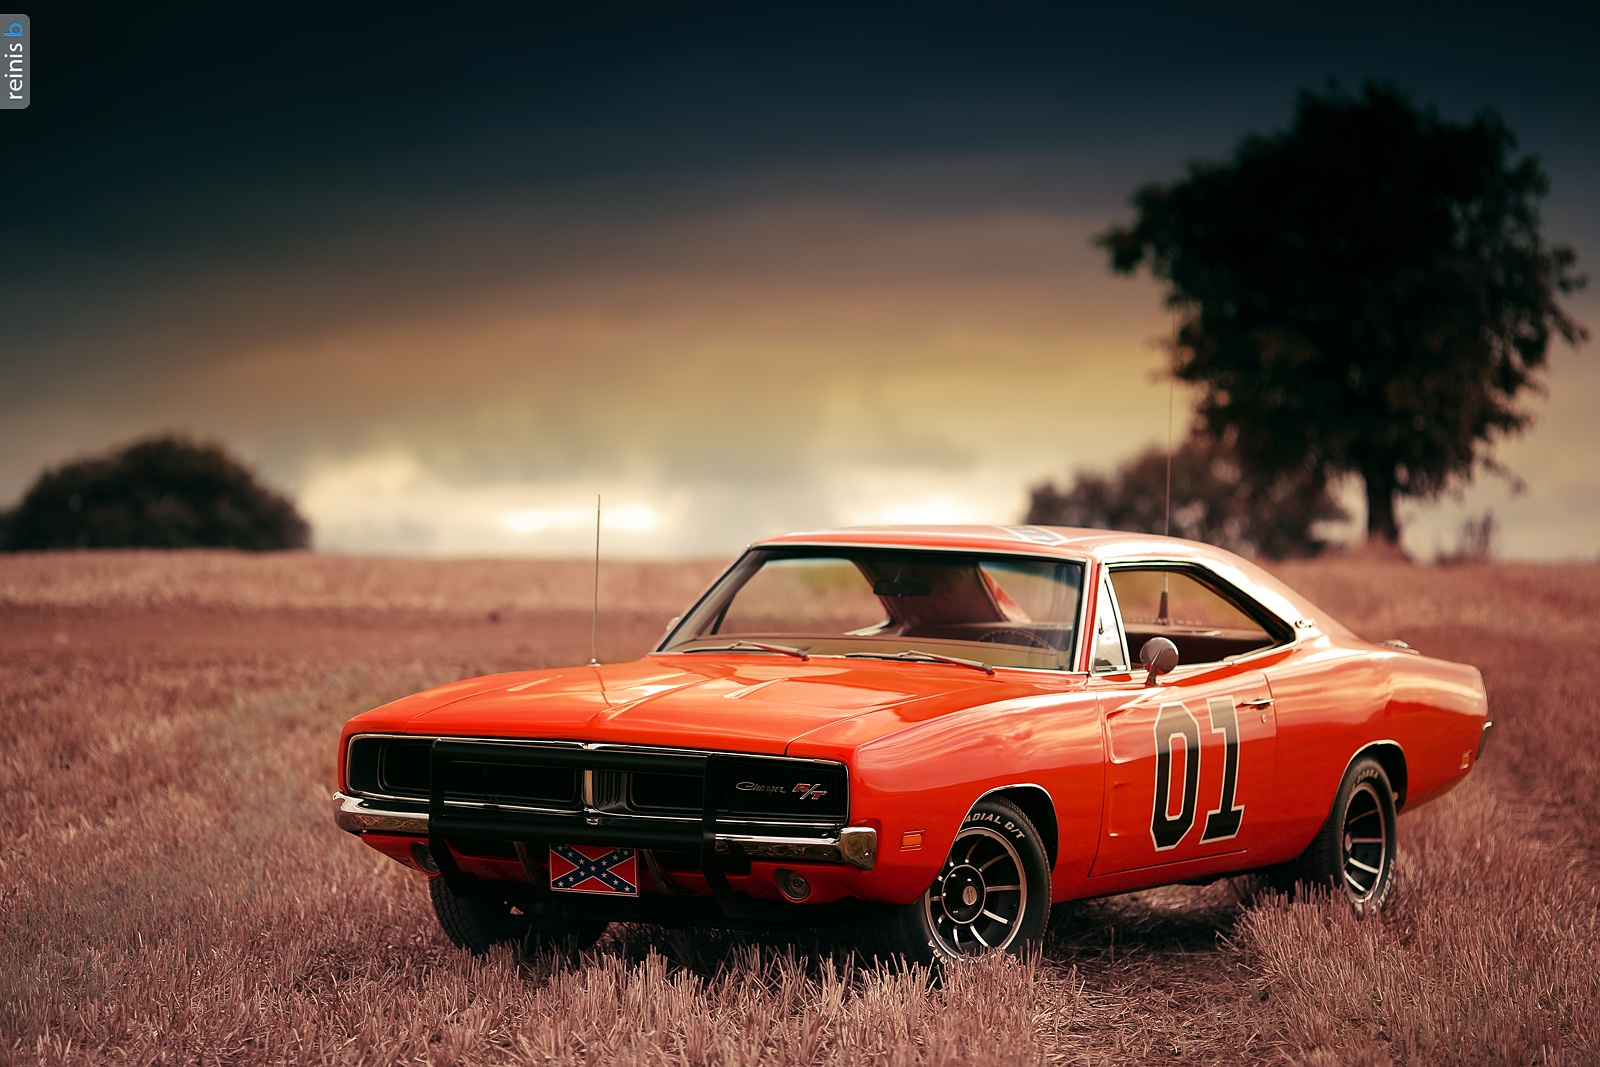 1600x1067, 427 Kb / , , , , dodge, charger, , 